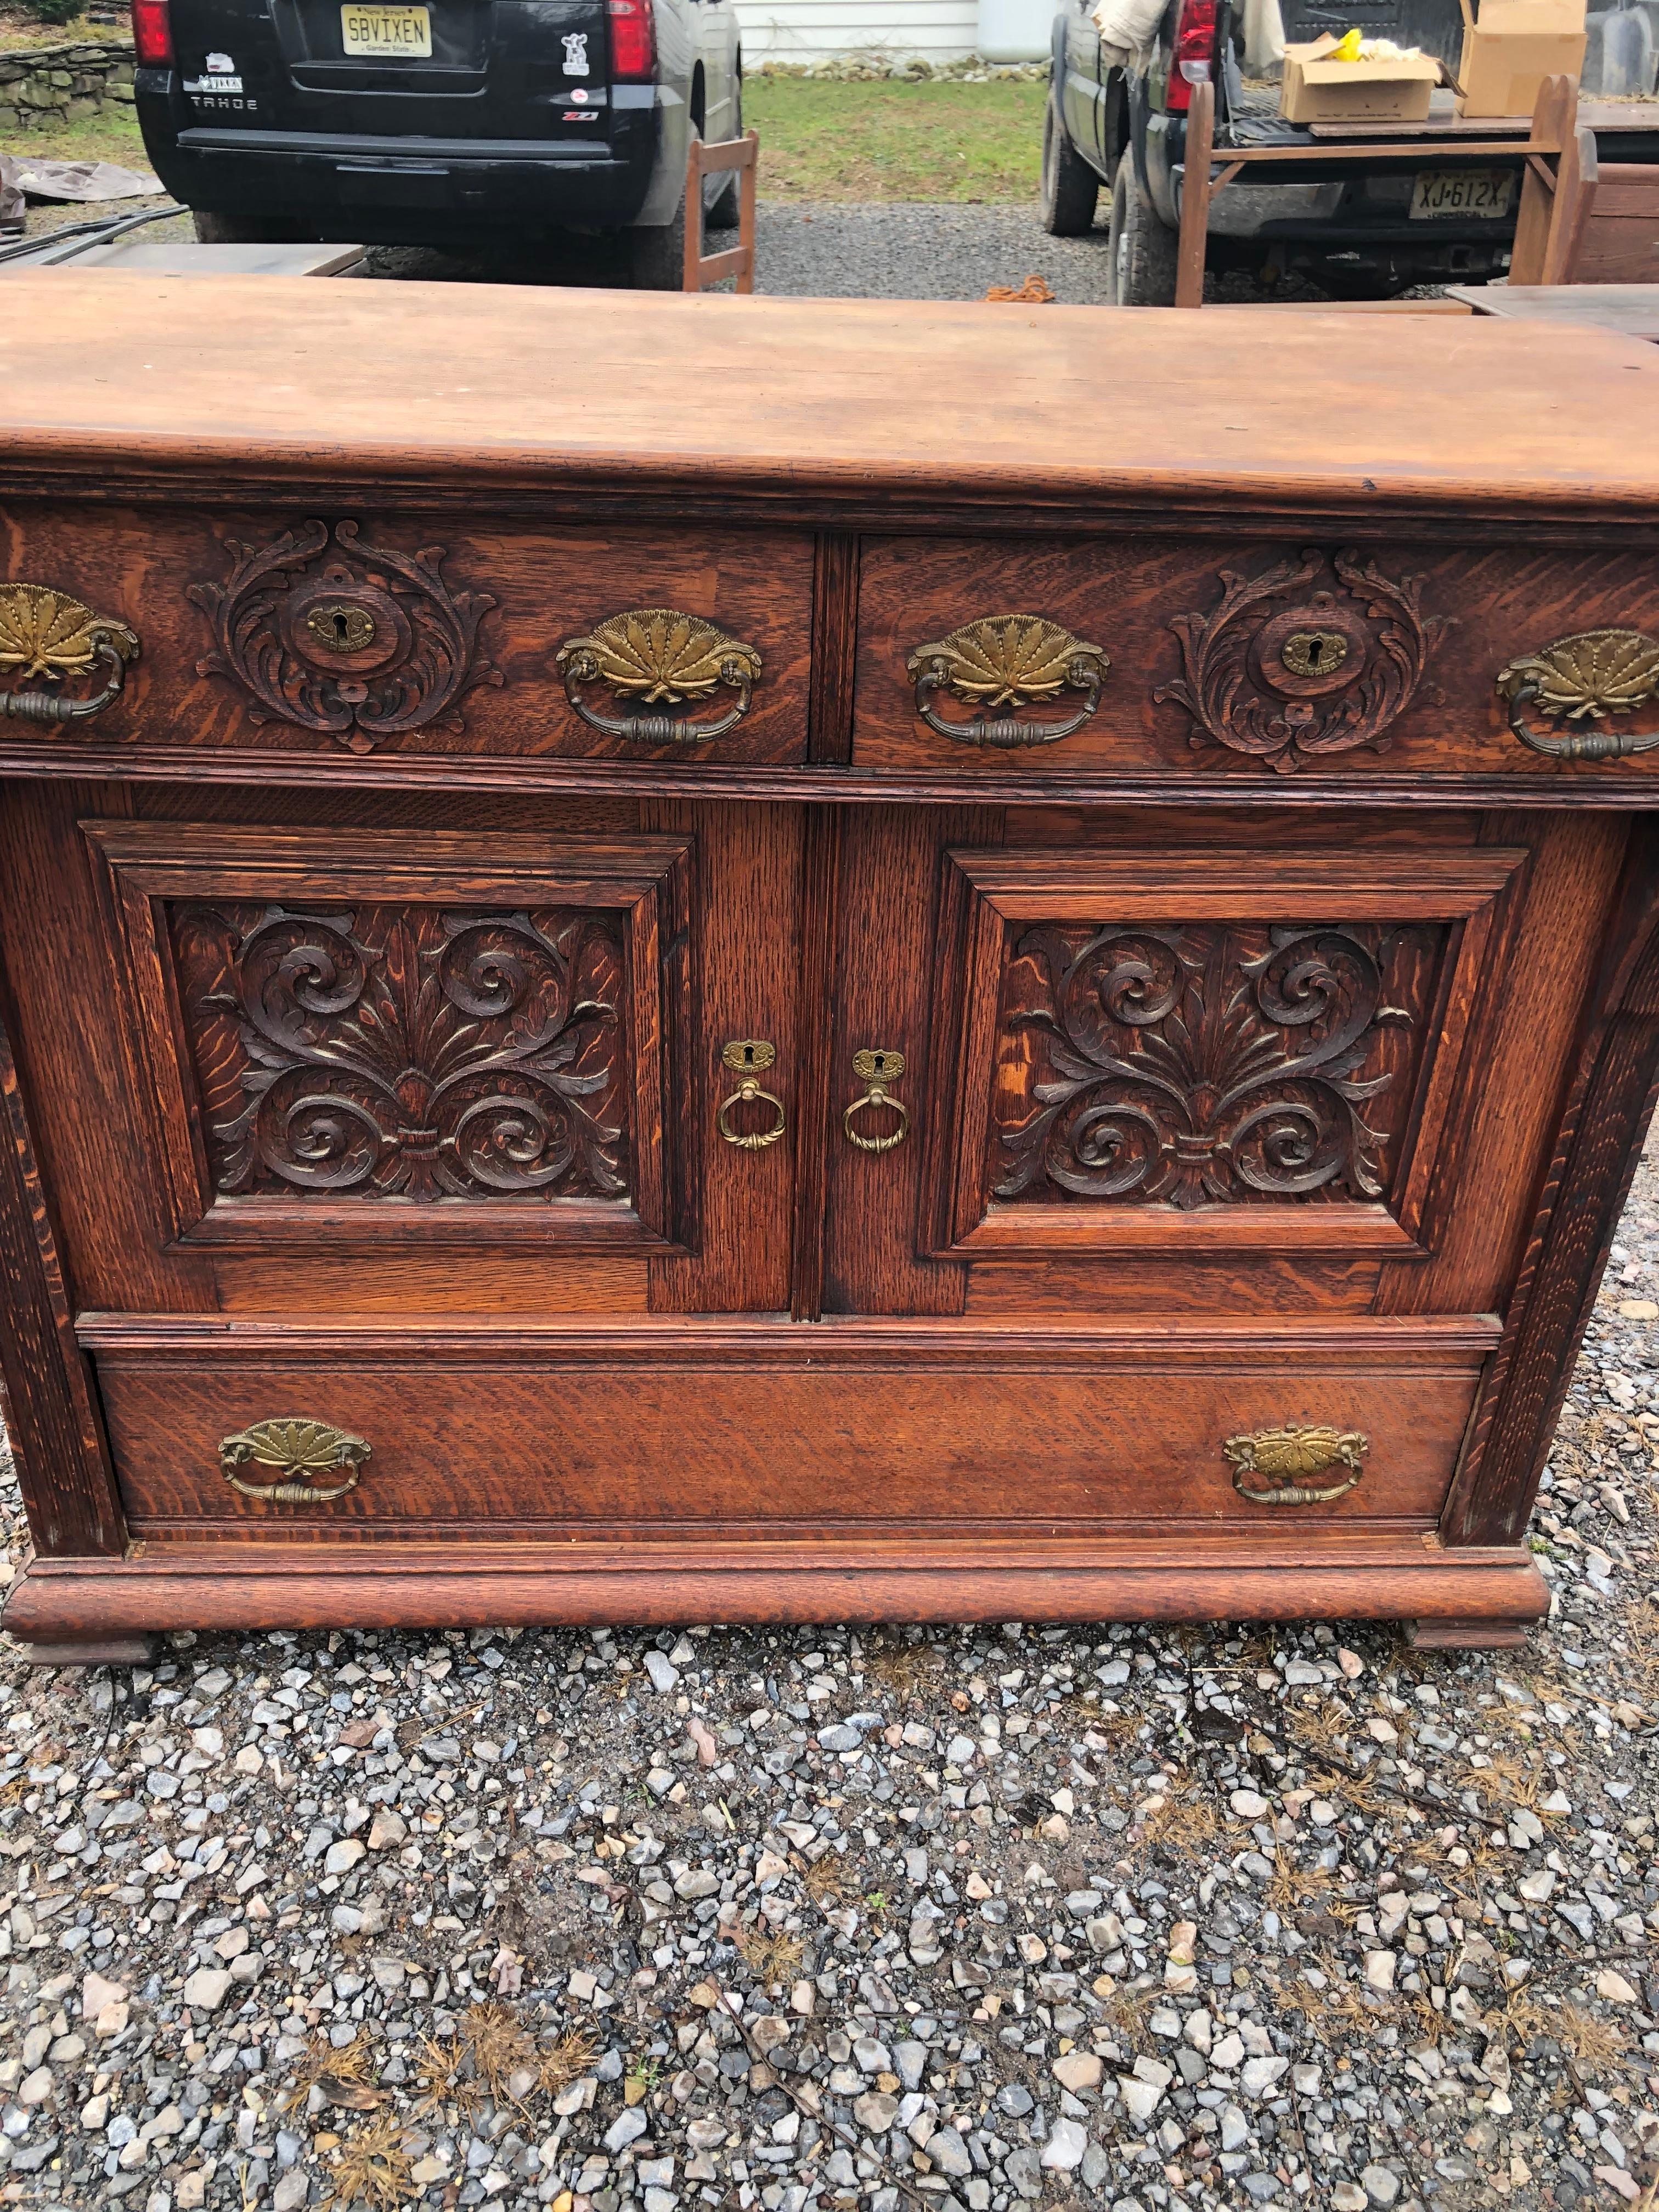 Beautifully carved impressive Victorian oak dresser or sideboard having lots of storage including two top drawers, two paneled doors with interior storage, and one large bottom drawer.  Incredibly handsome brass hardware.